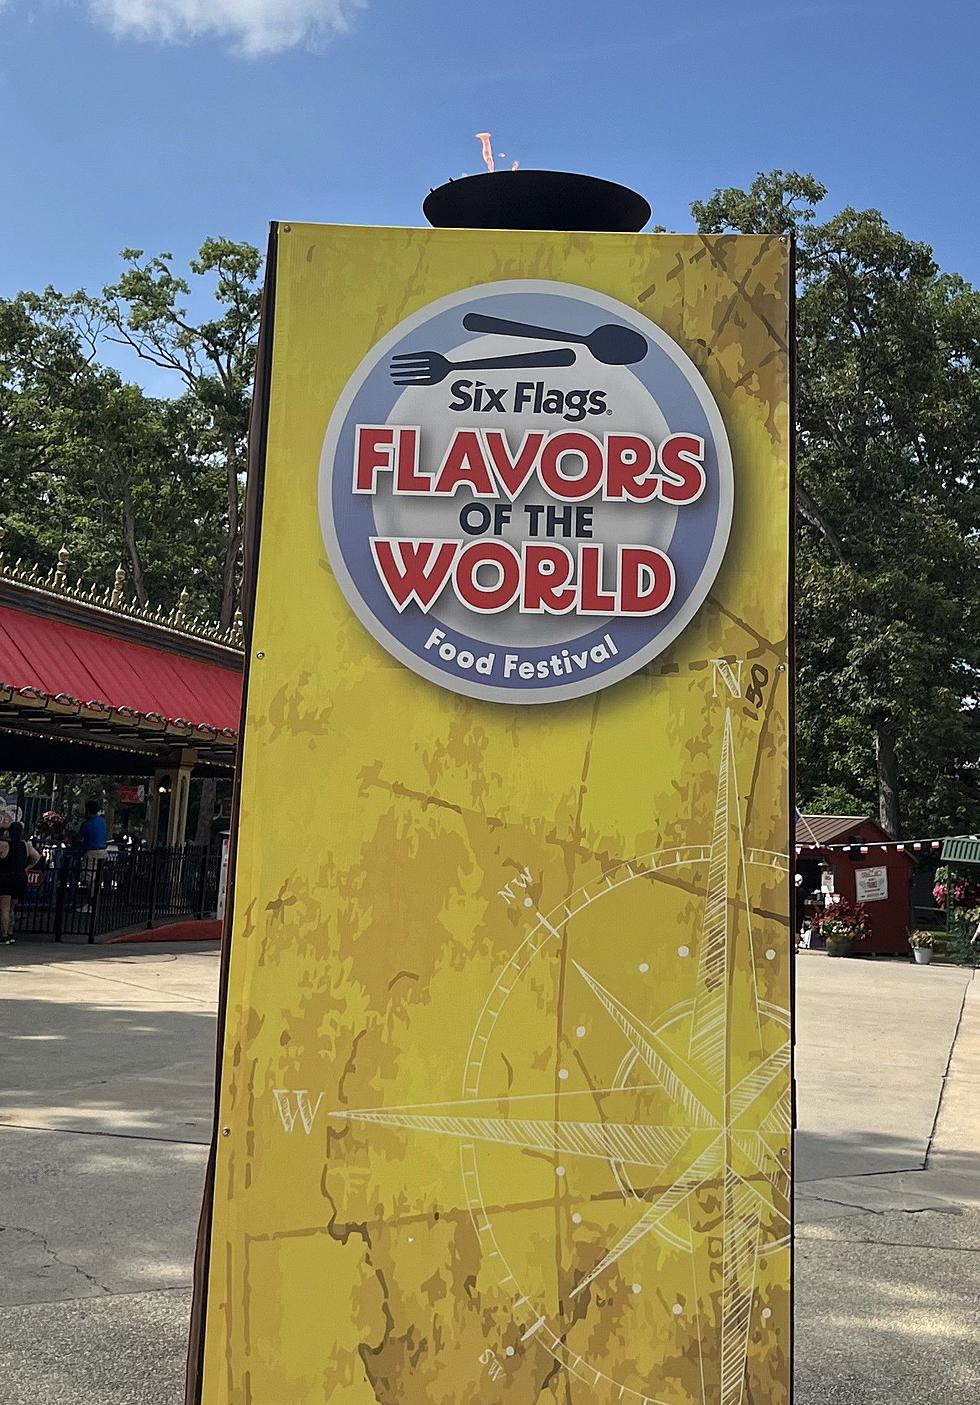 14 Pictures of the Fabulous "Flavors of the World" at Six Flags